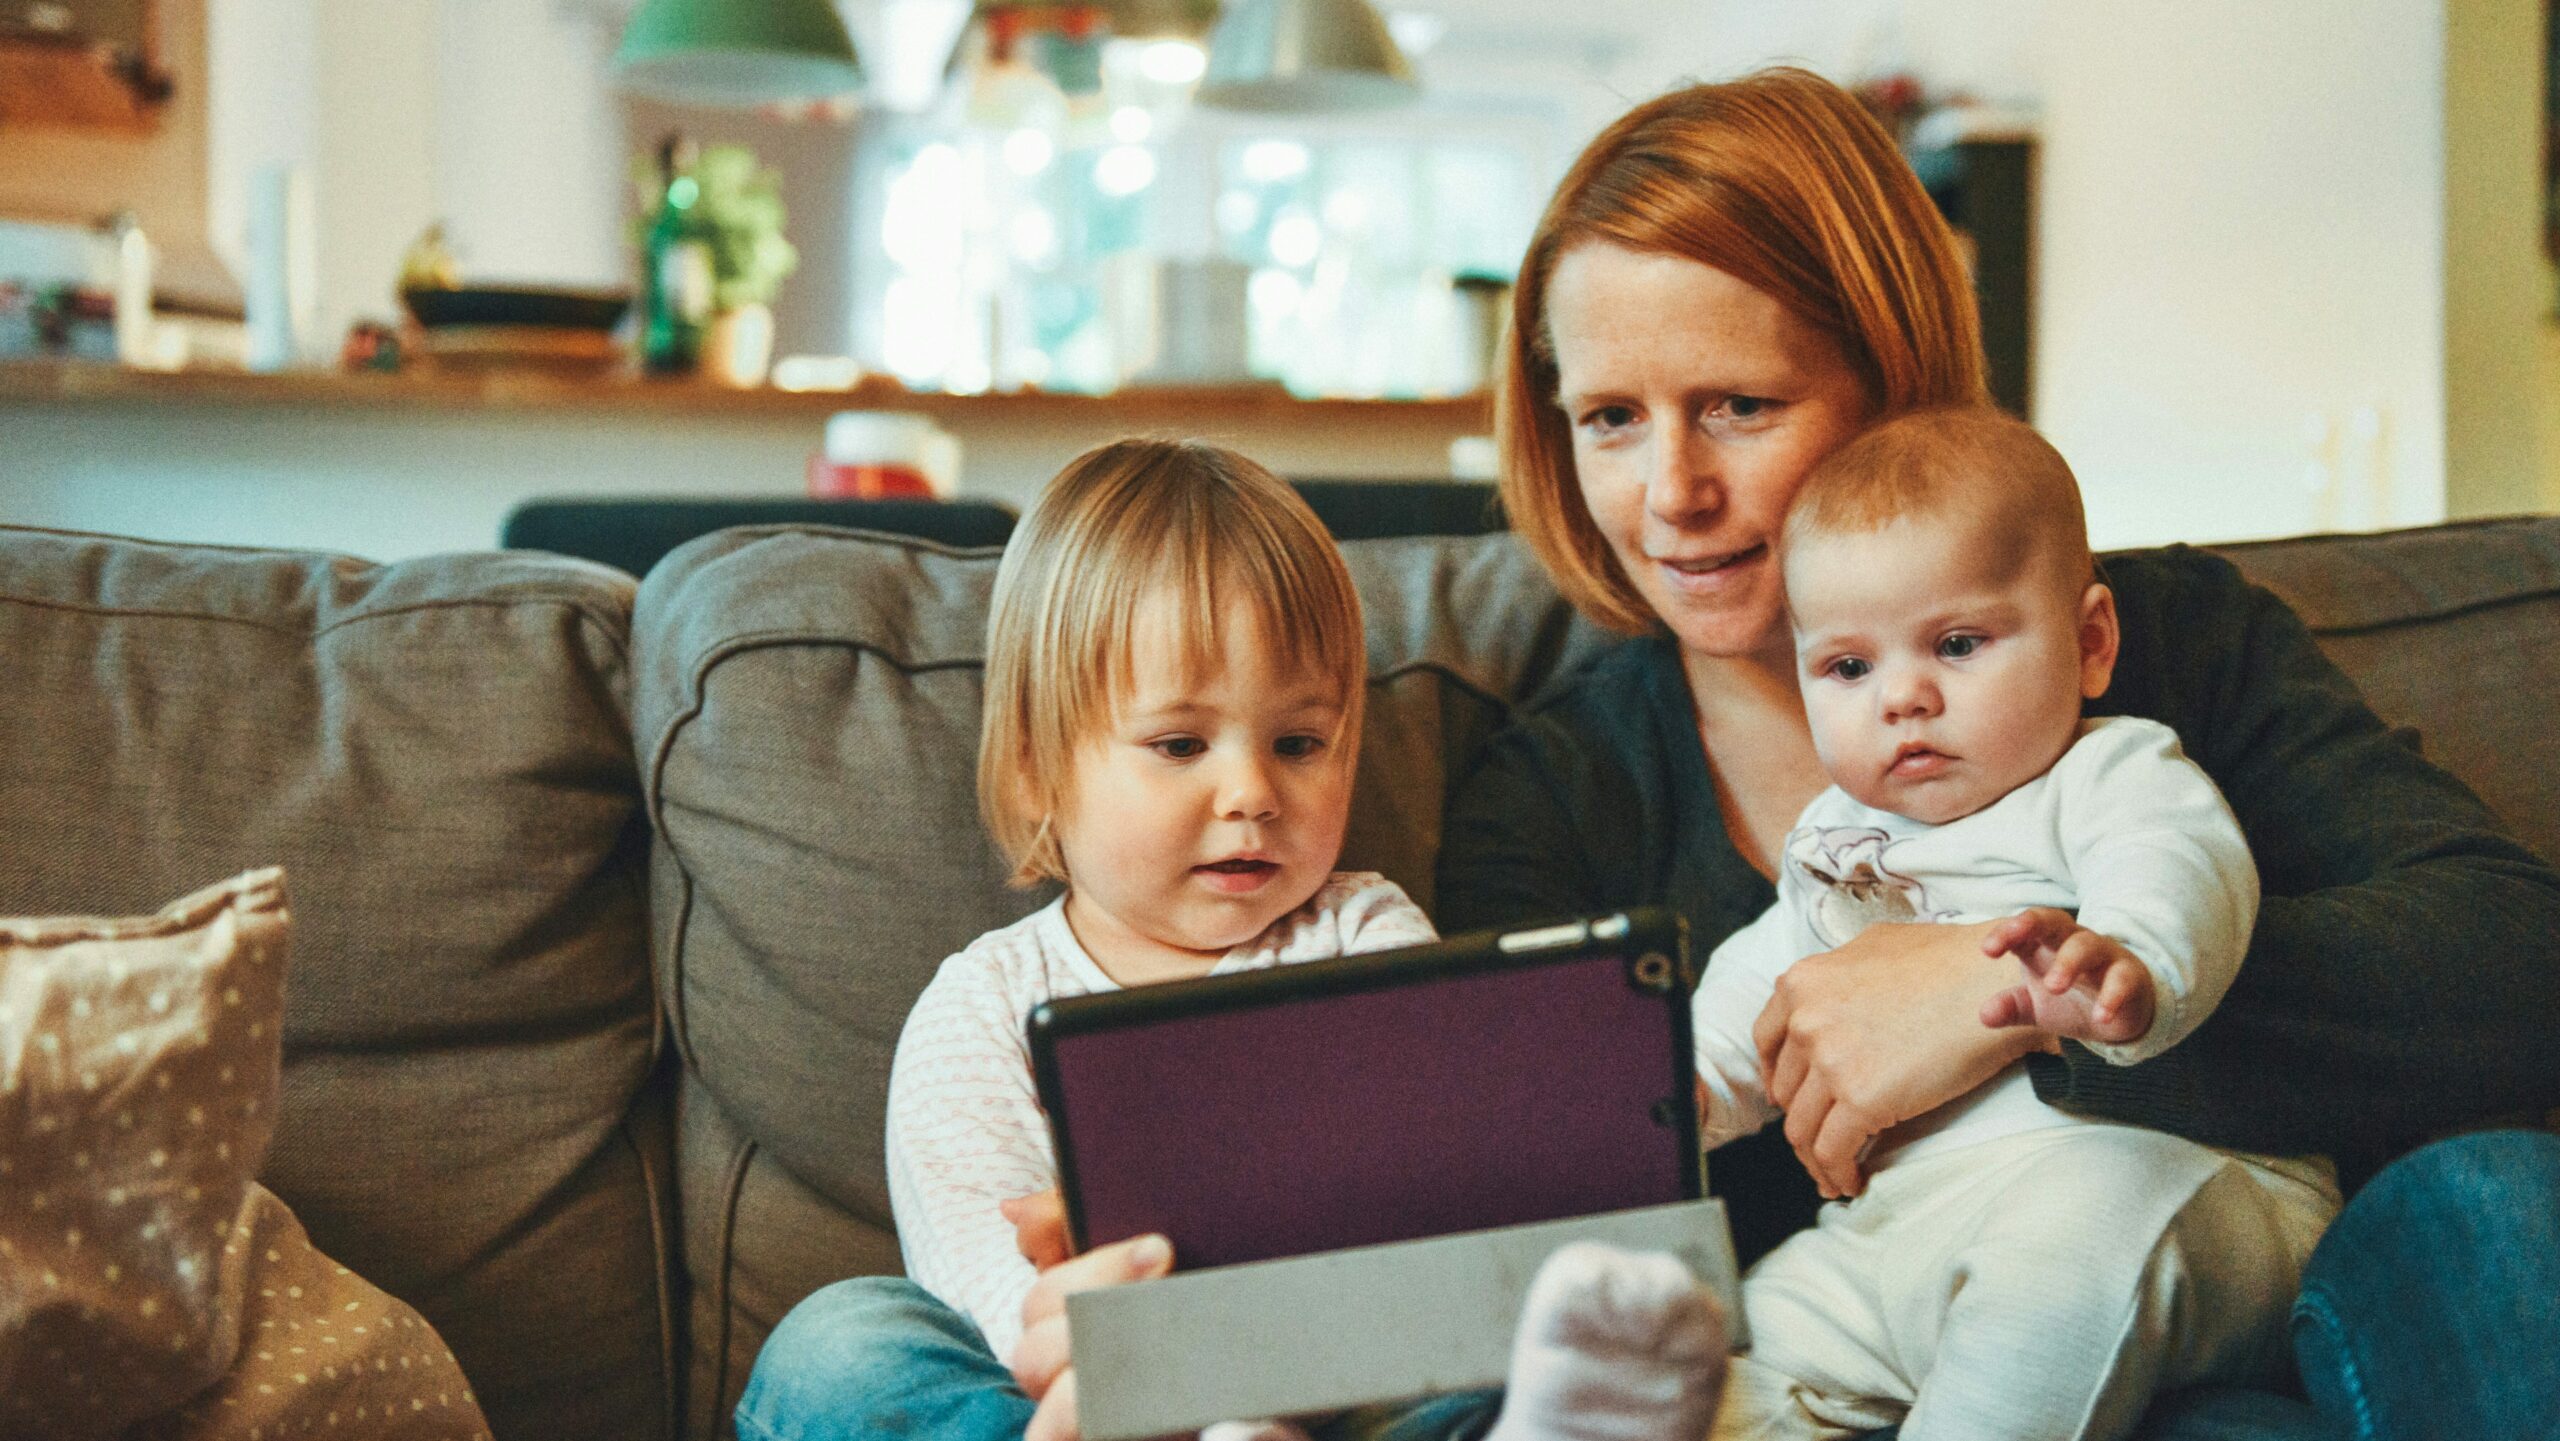 A mother comfortably sits with her children, including a toddler and a baby, showing a personal moment of family screen time. The trio is focused on a tablet, suggesting the early effects of kids' screen time on family bonding and child development.